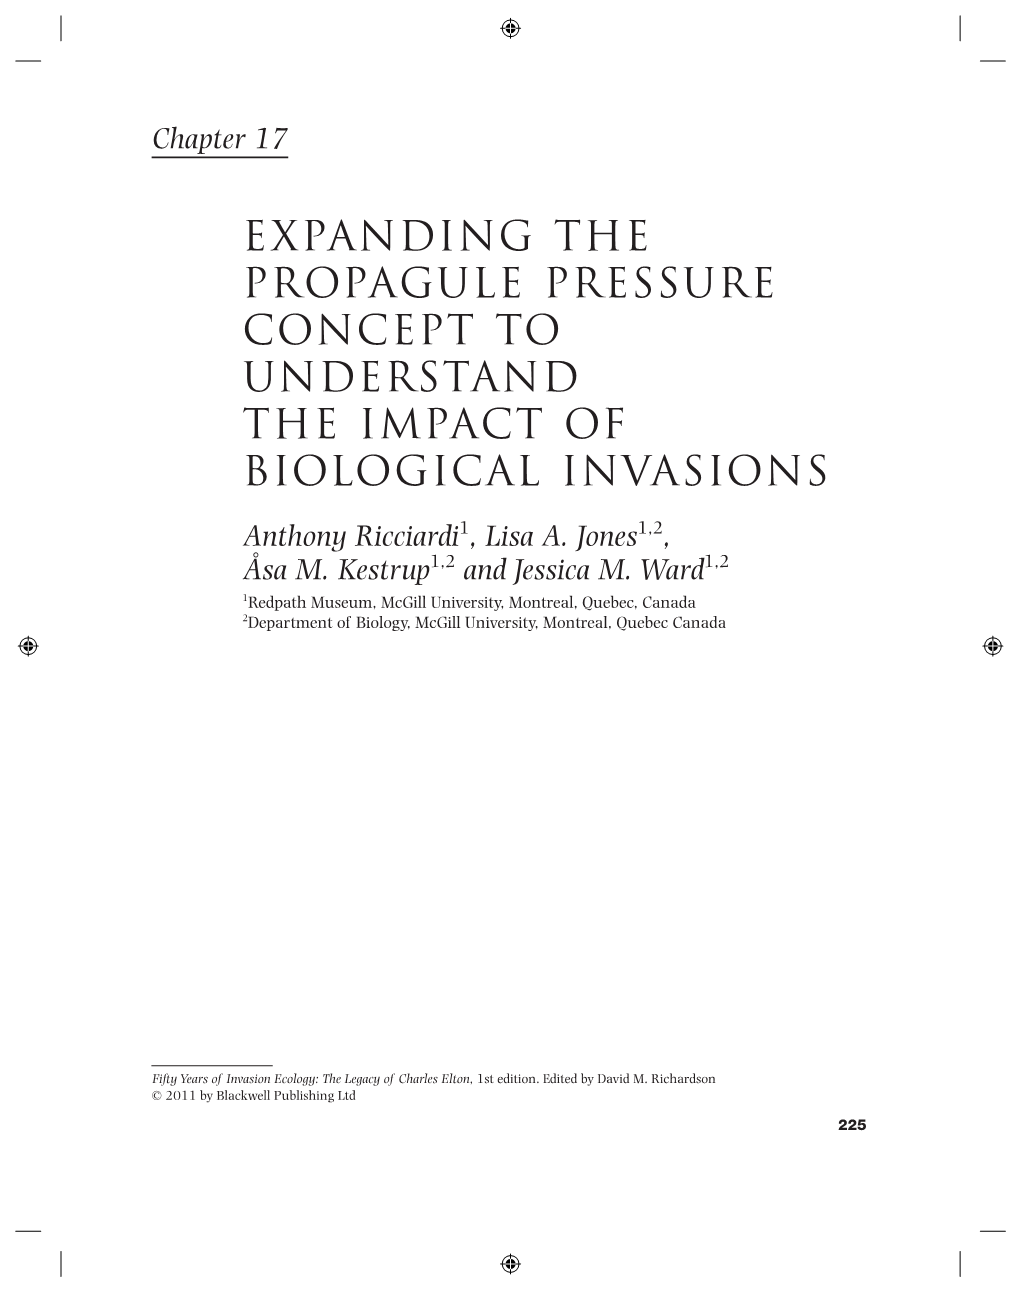 Expanding the Propagule Pressure Concept to Understand the Impact of Biological Invasions